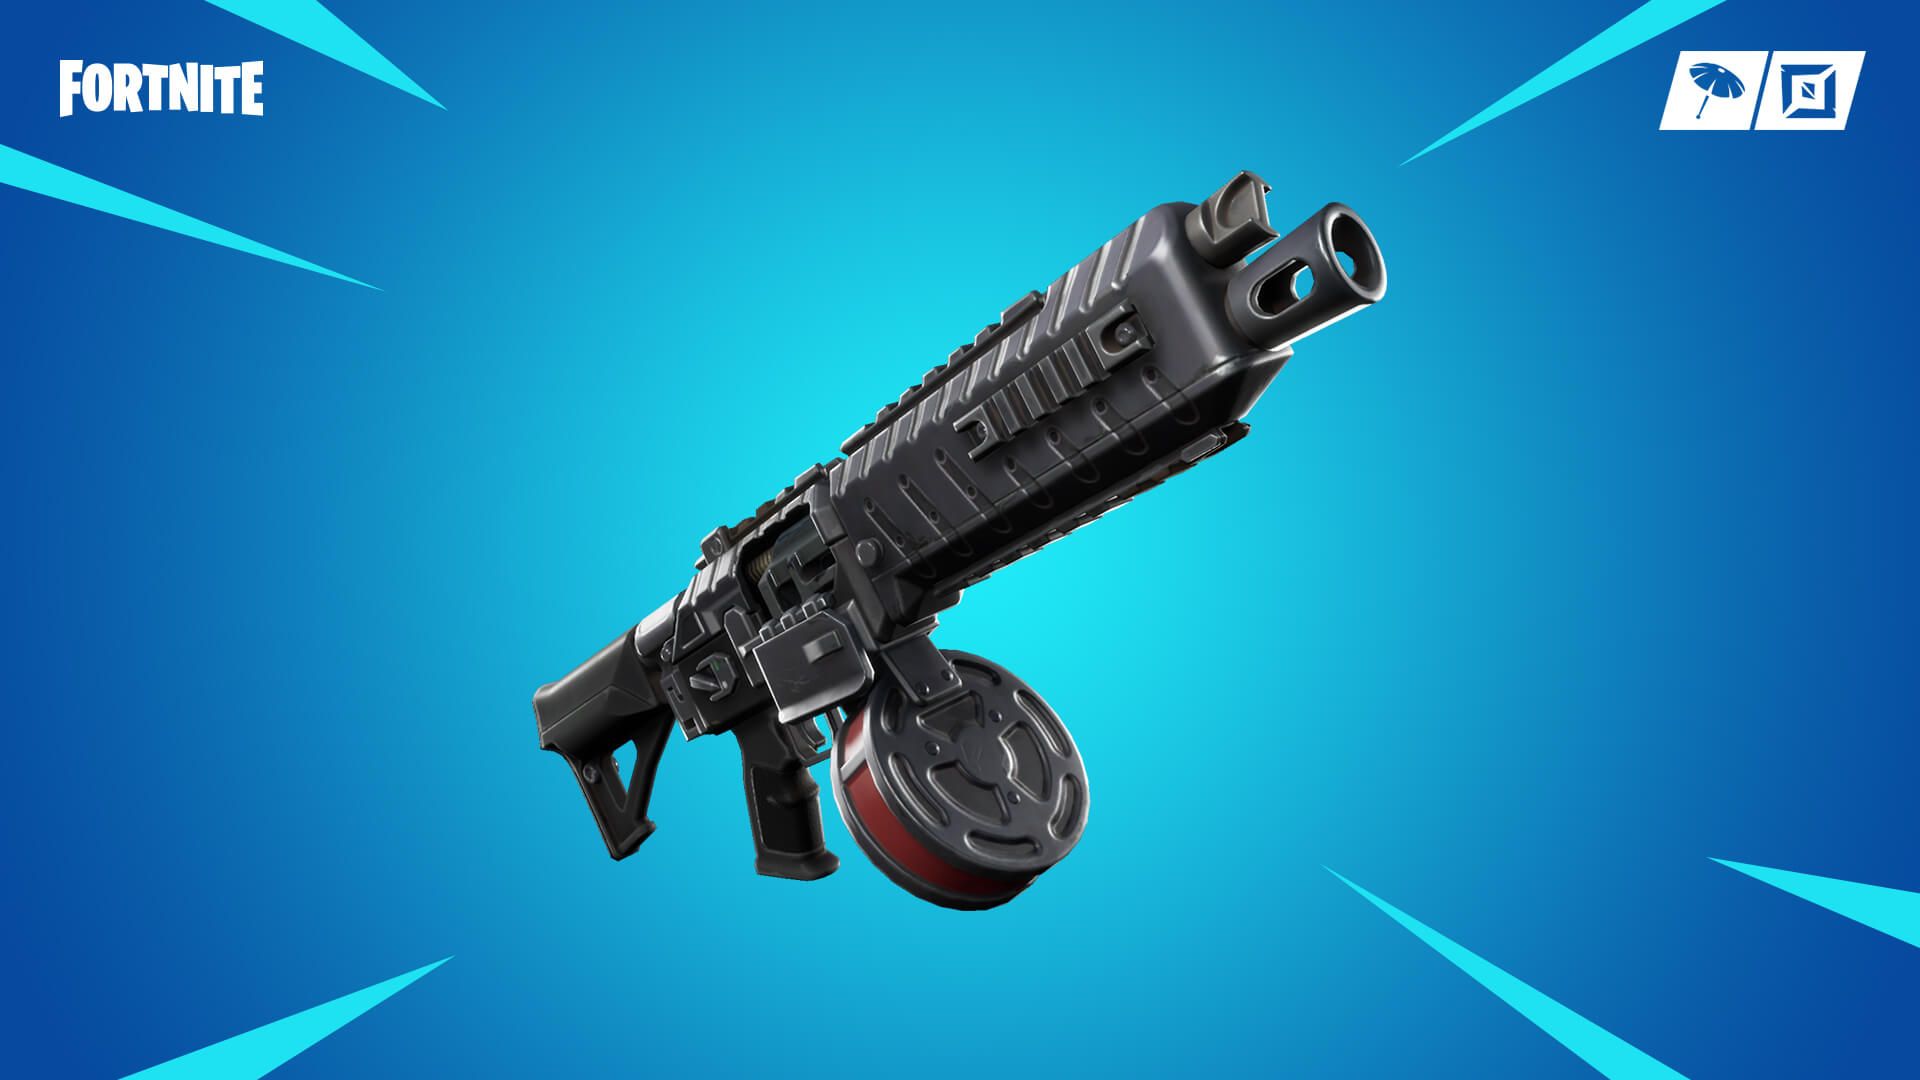 Fortnite gets new Drum Shotgun in round 2 of the v9.30 Content